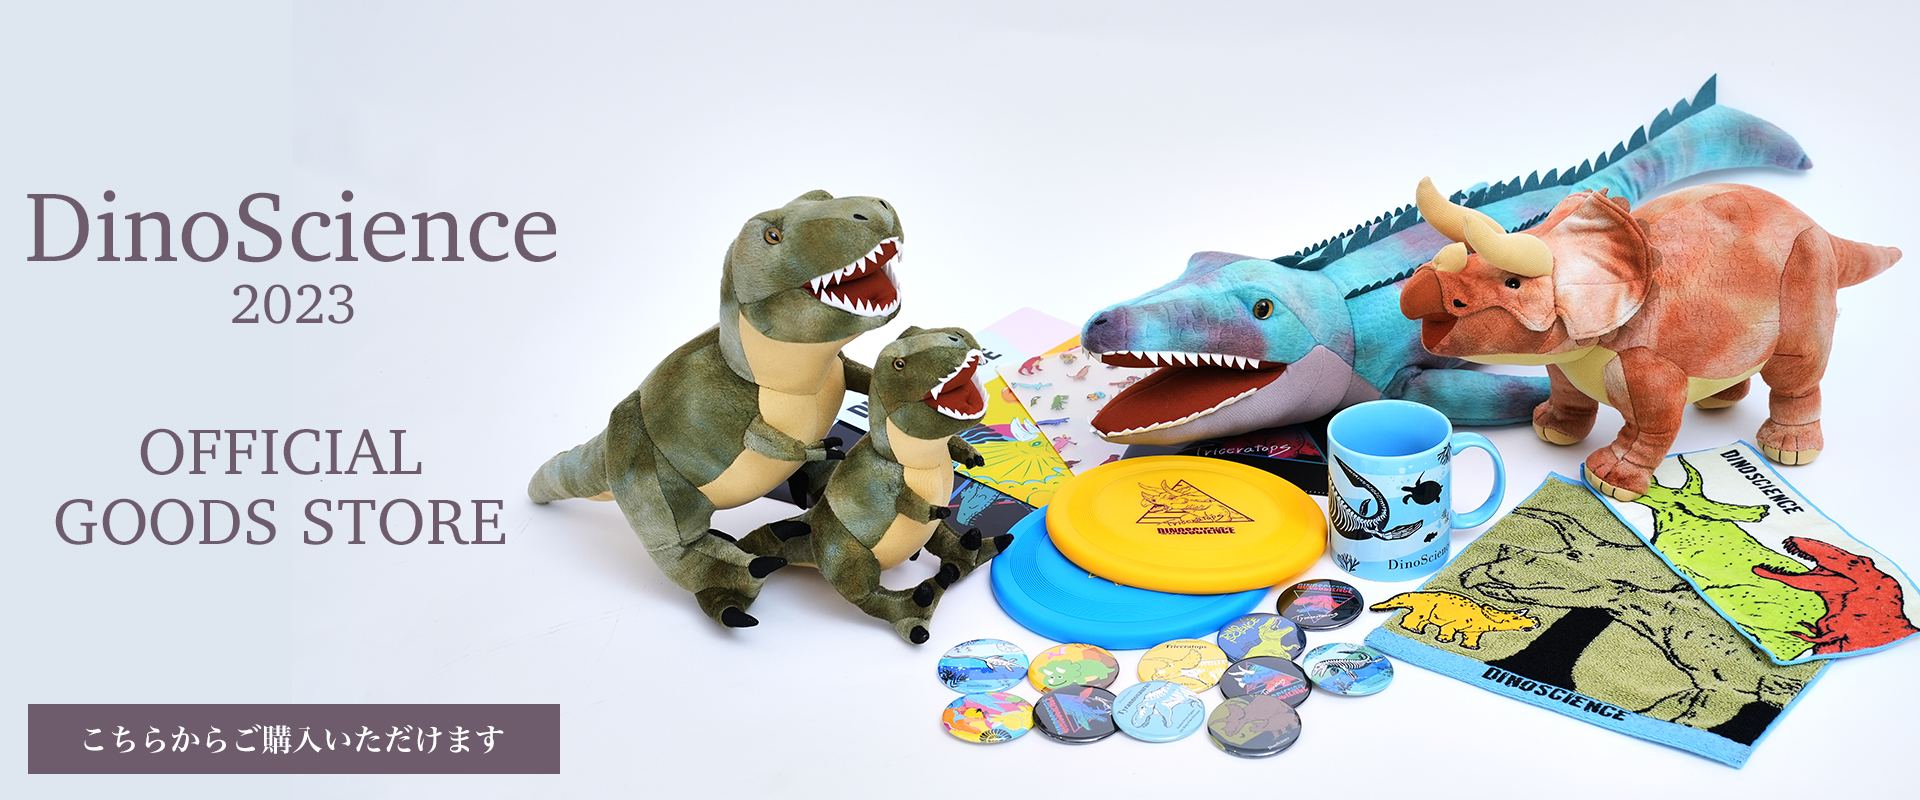 DinoScience 恐竜科学博2023　OFFICIAL GOODS STORE